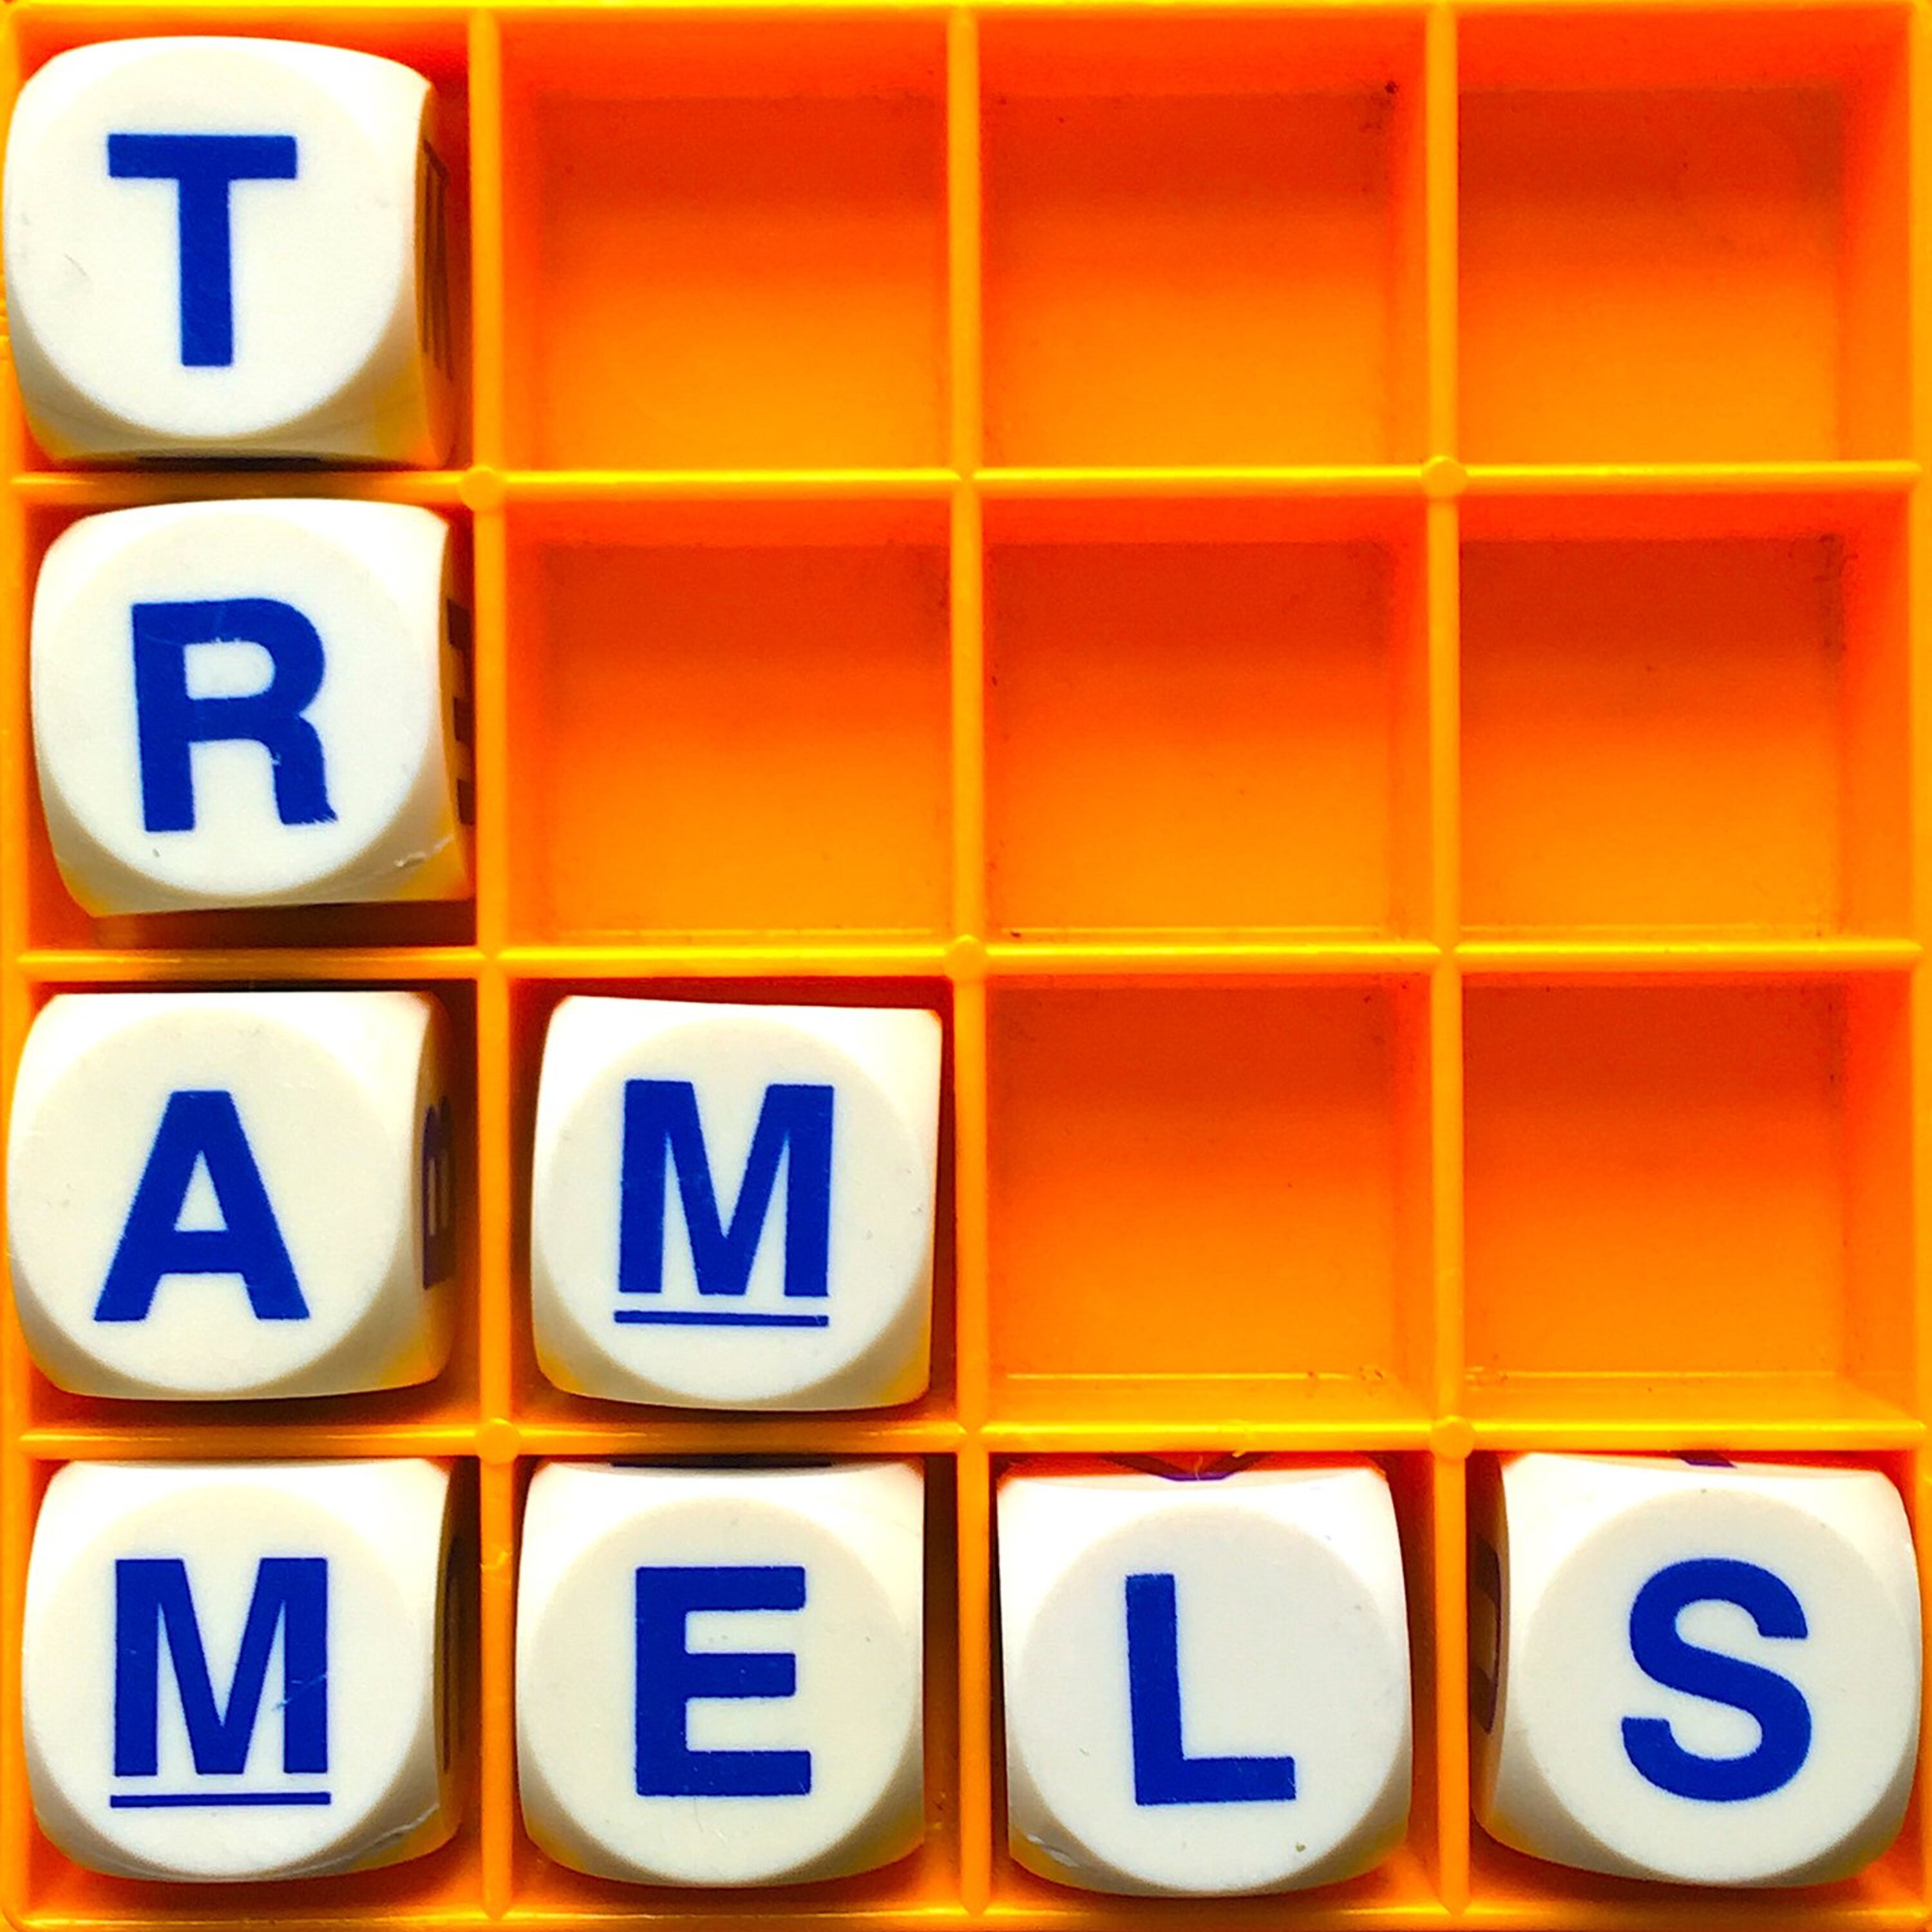 Thumbnail for "84. Trammels".